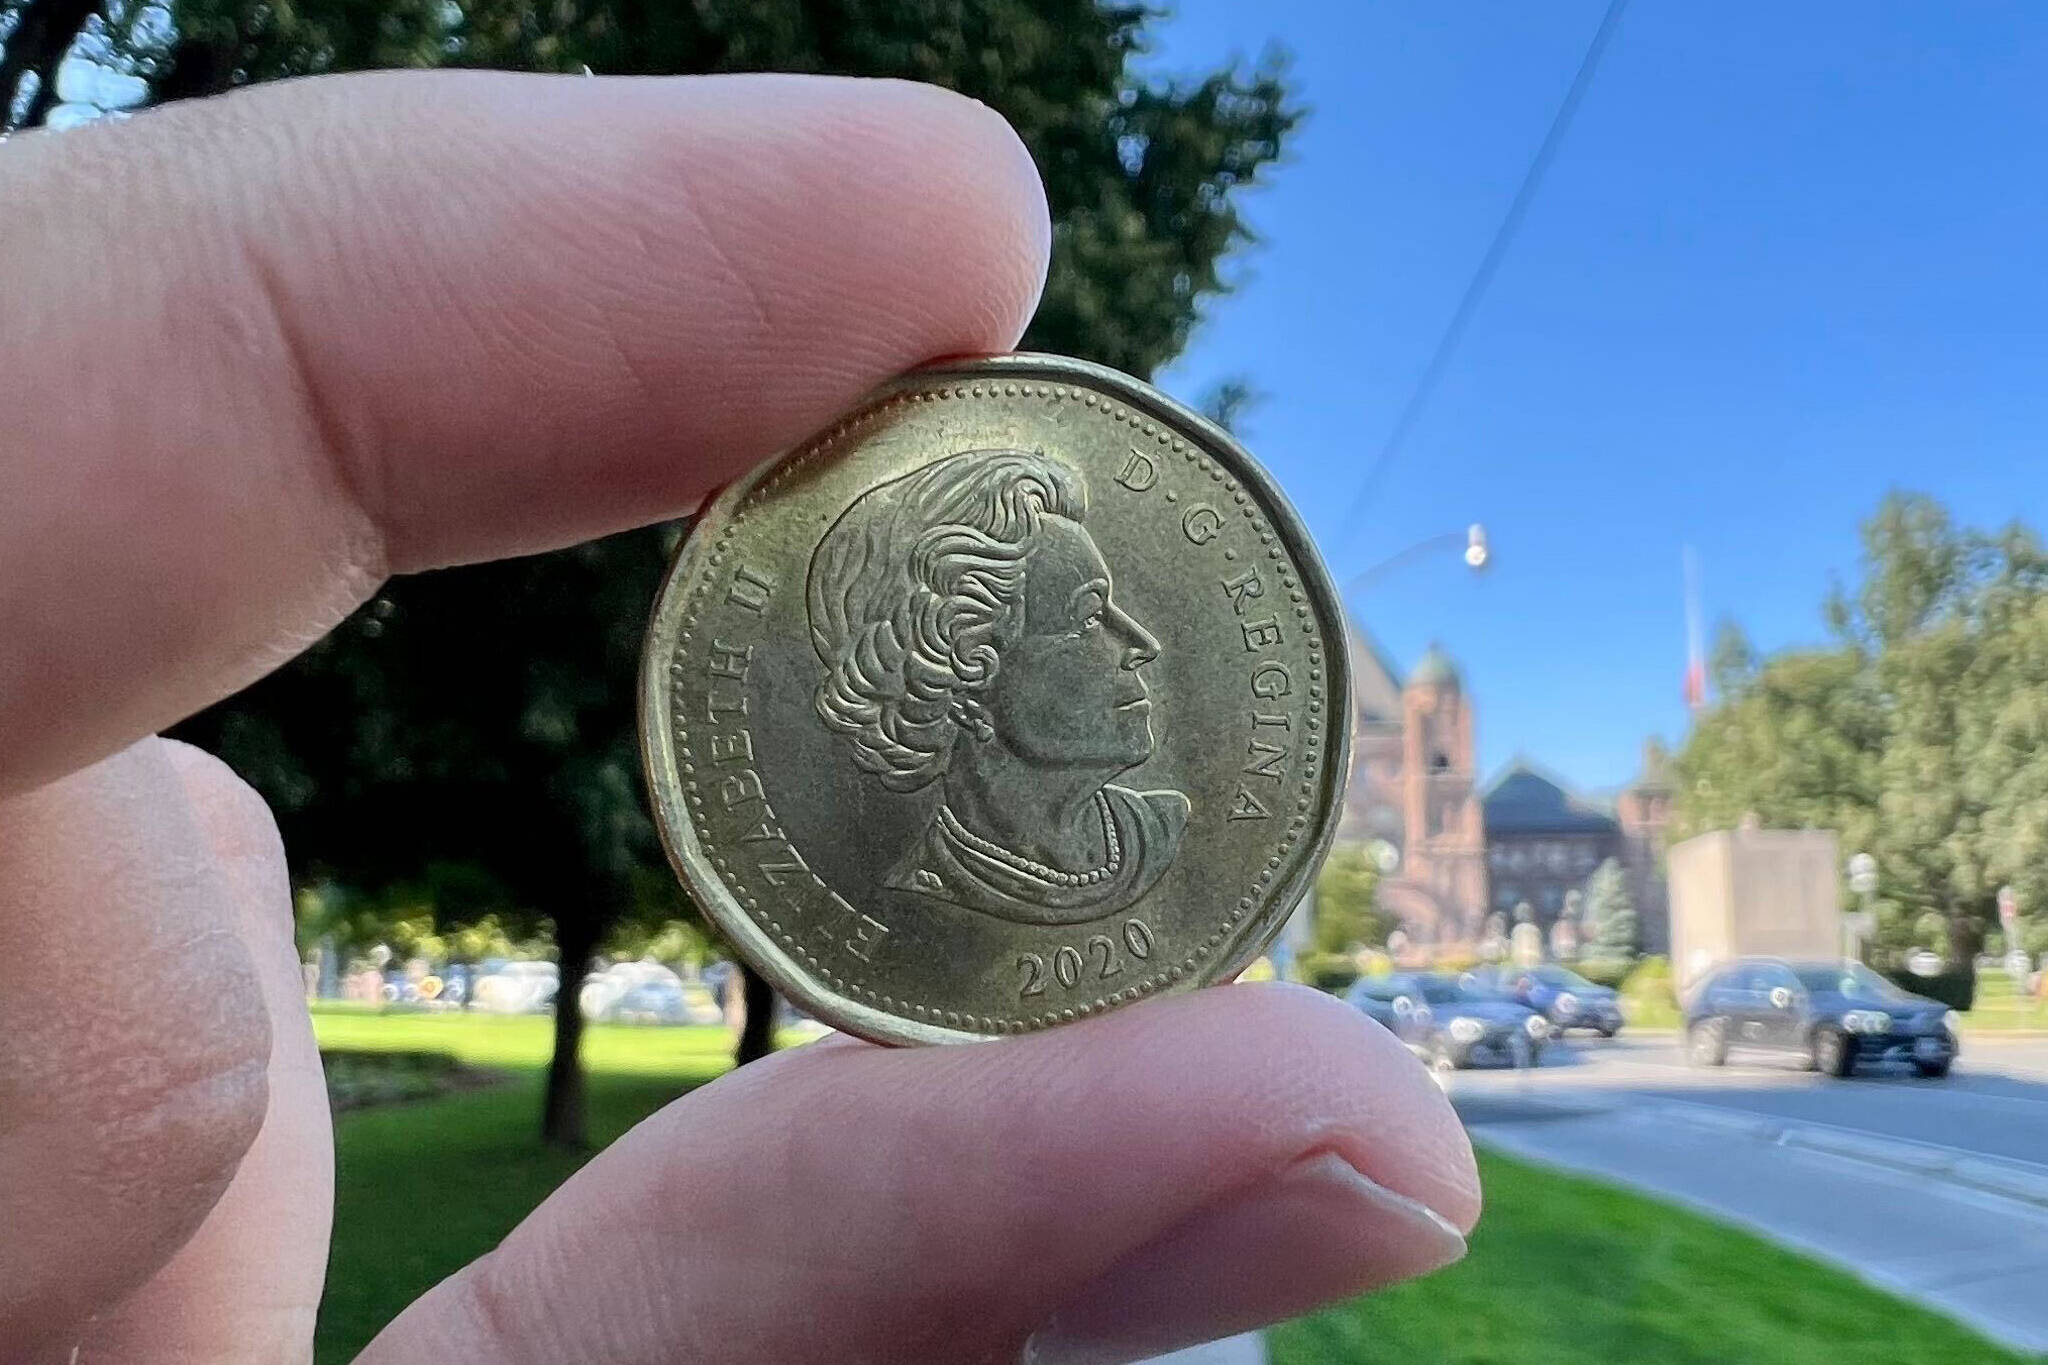 Canada Has A New $1 Coin & The Loonie Is Made Up Of Pure Silver